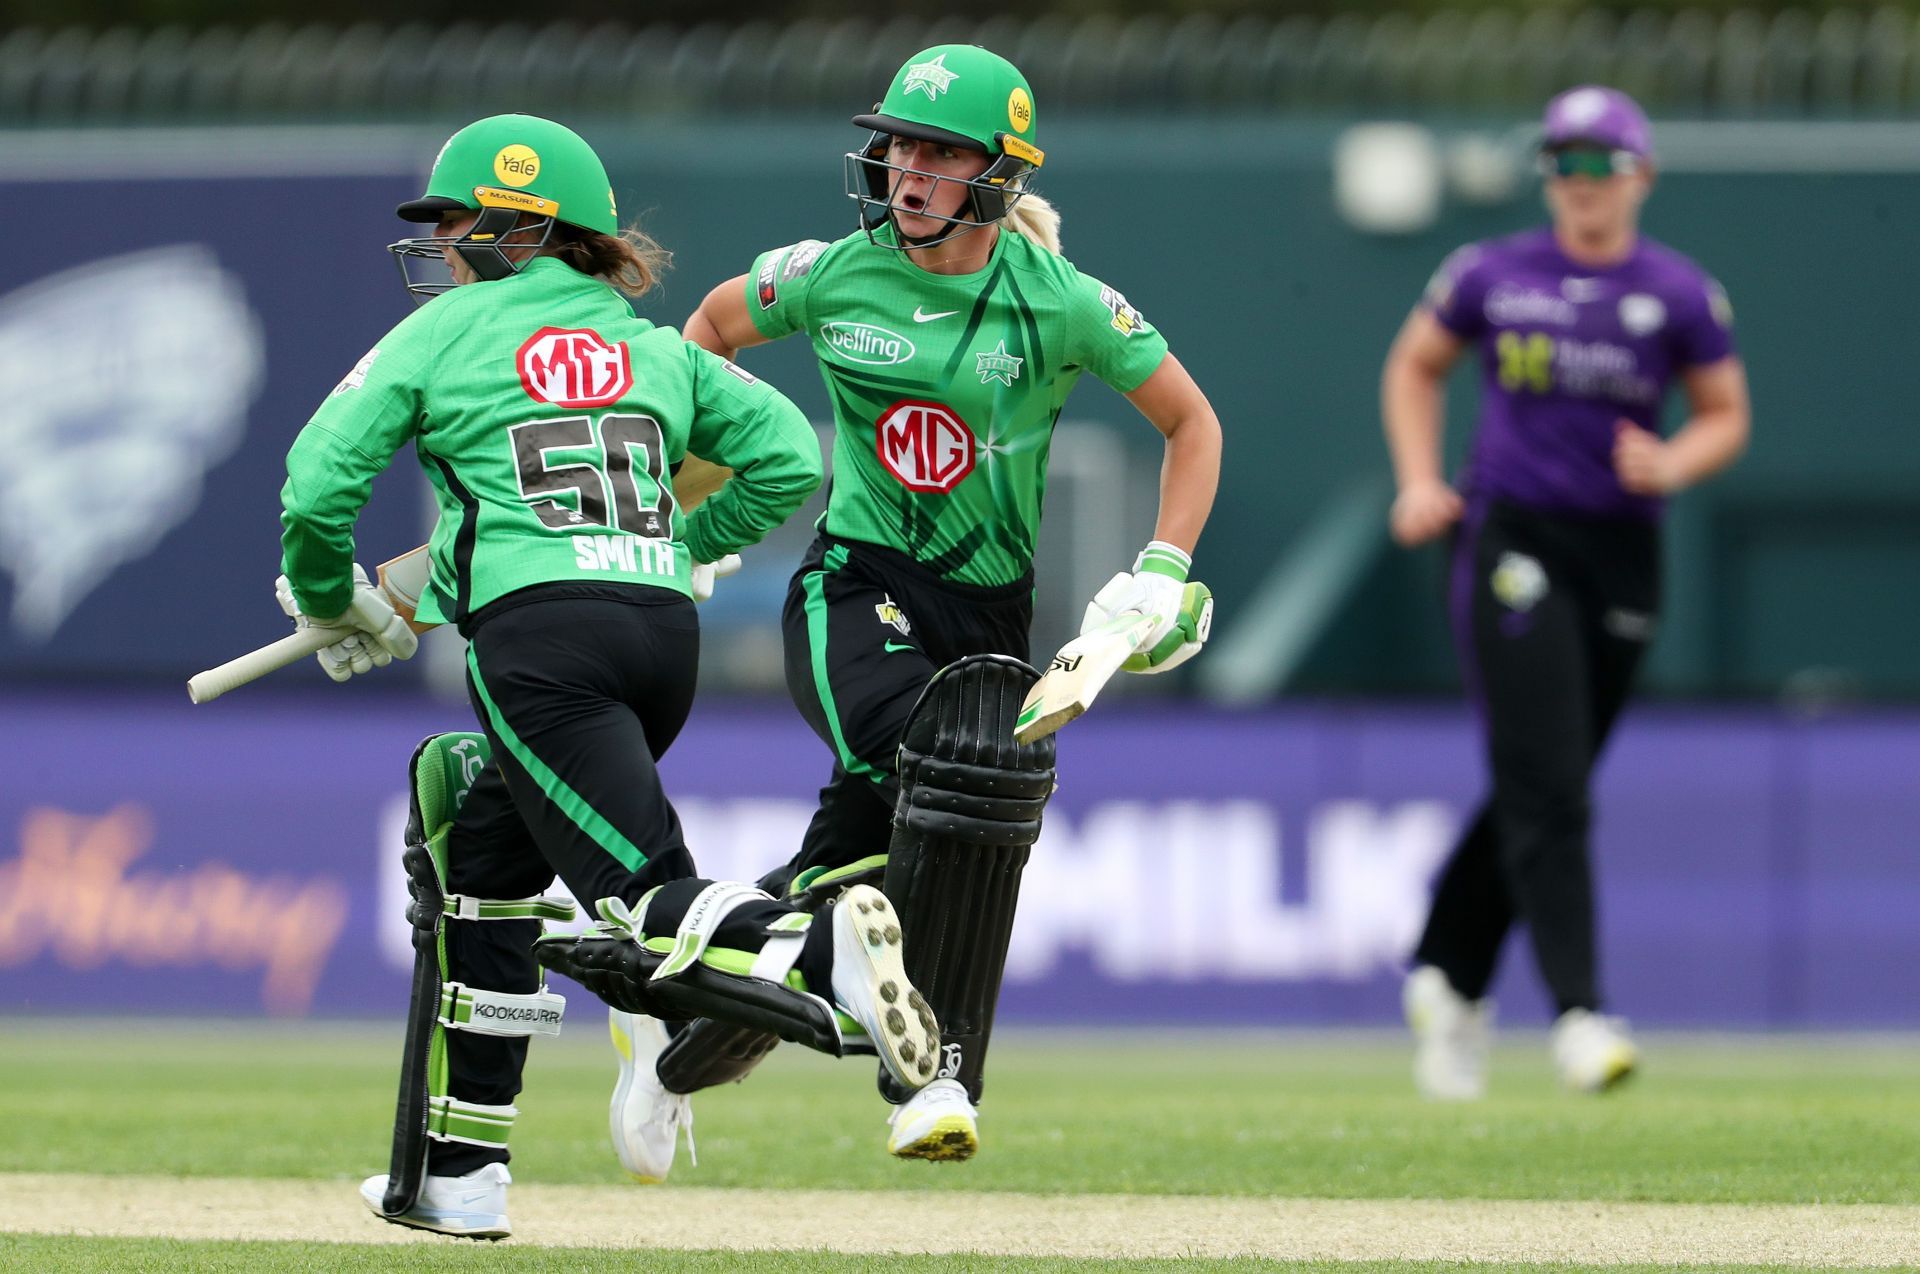 Players running between the wicket in the WBBL - Stars v Hurricanes